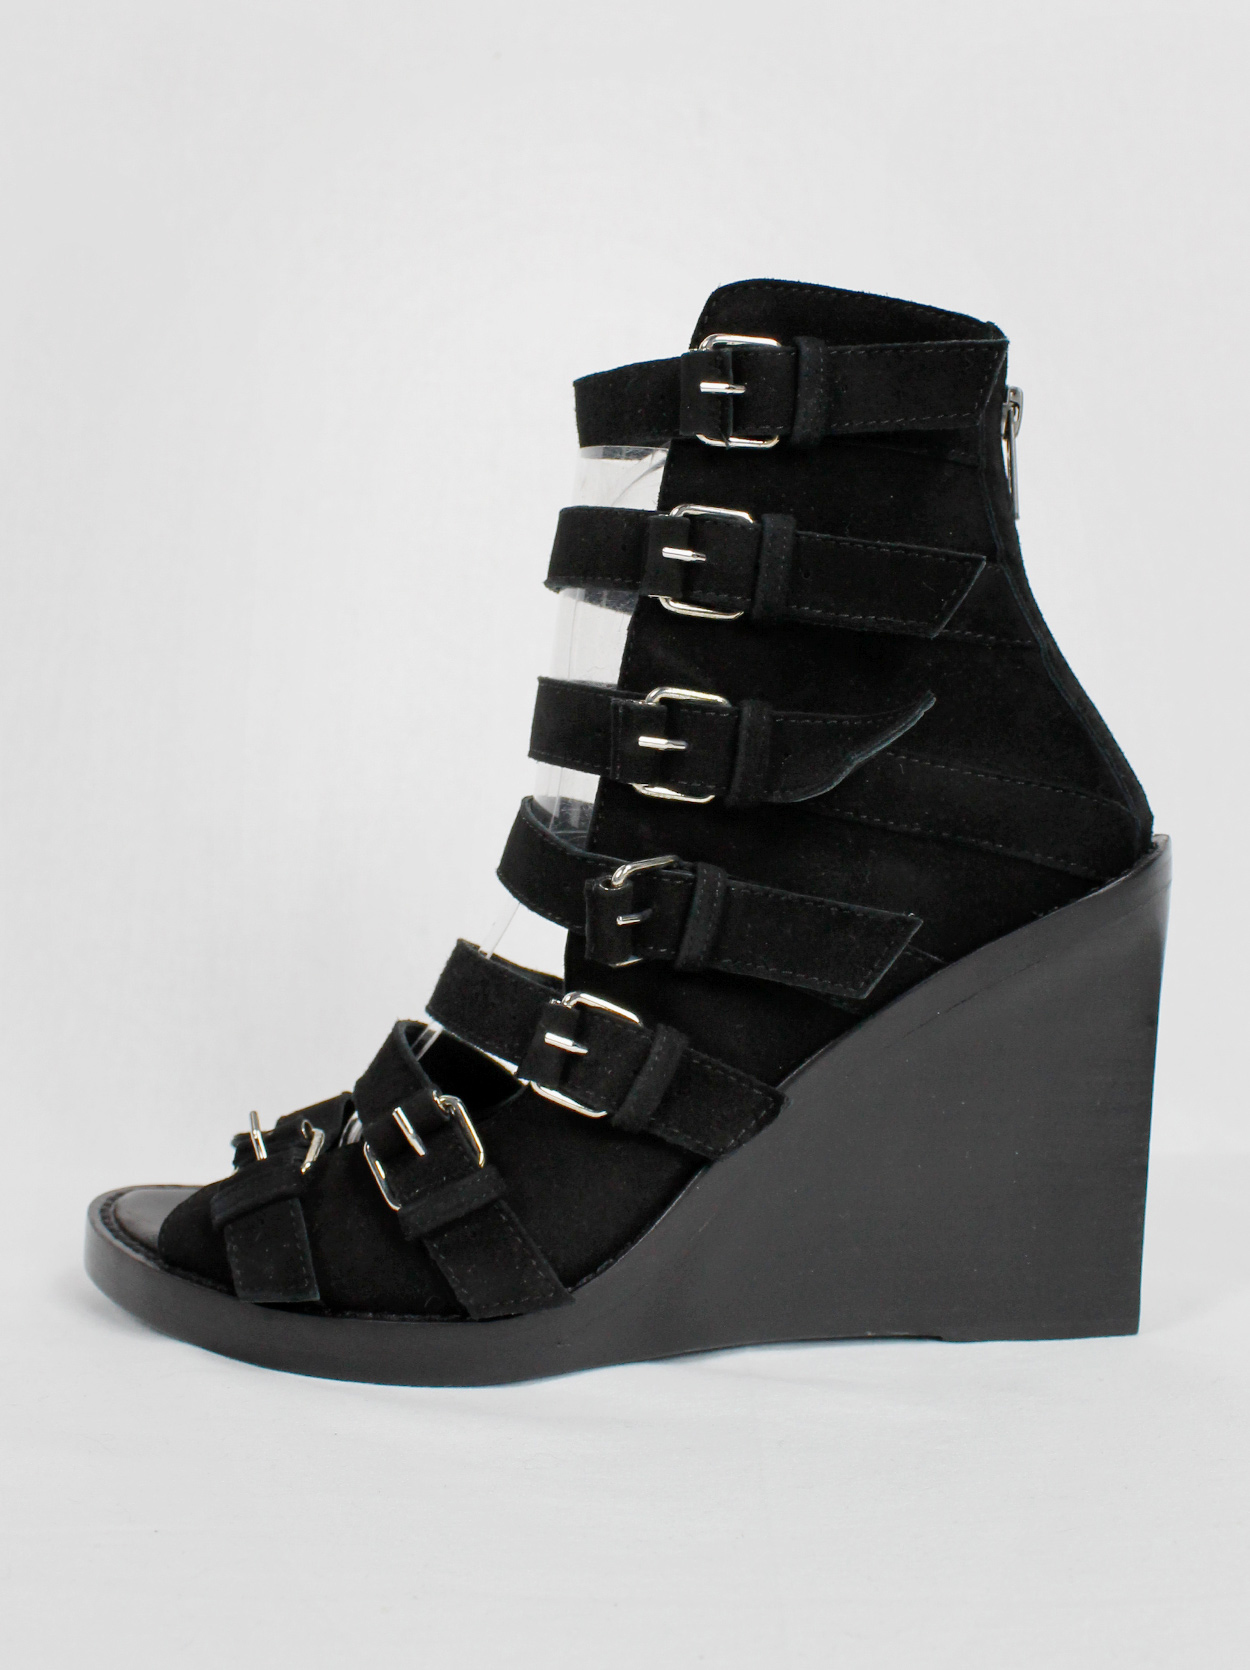 Ann Demeulemeester Blanche black suede wedge sandals with buckle belts ...